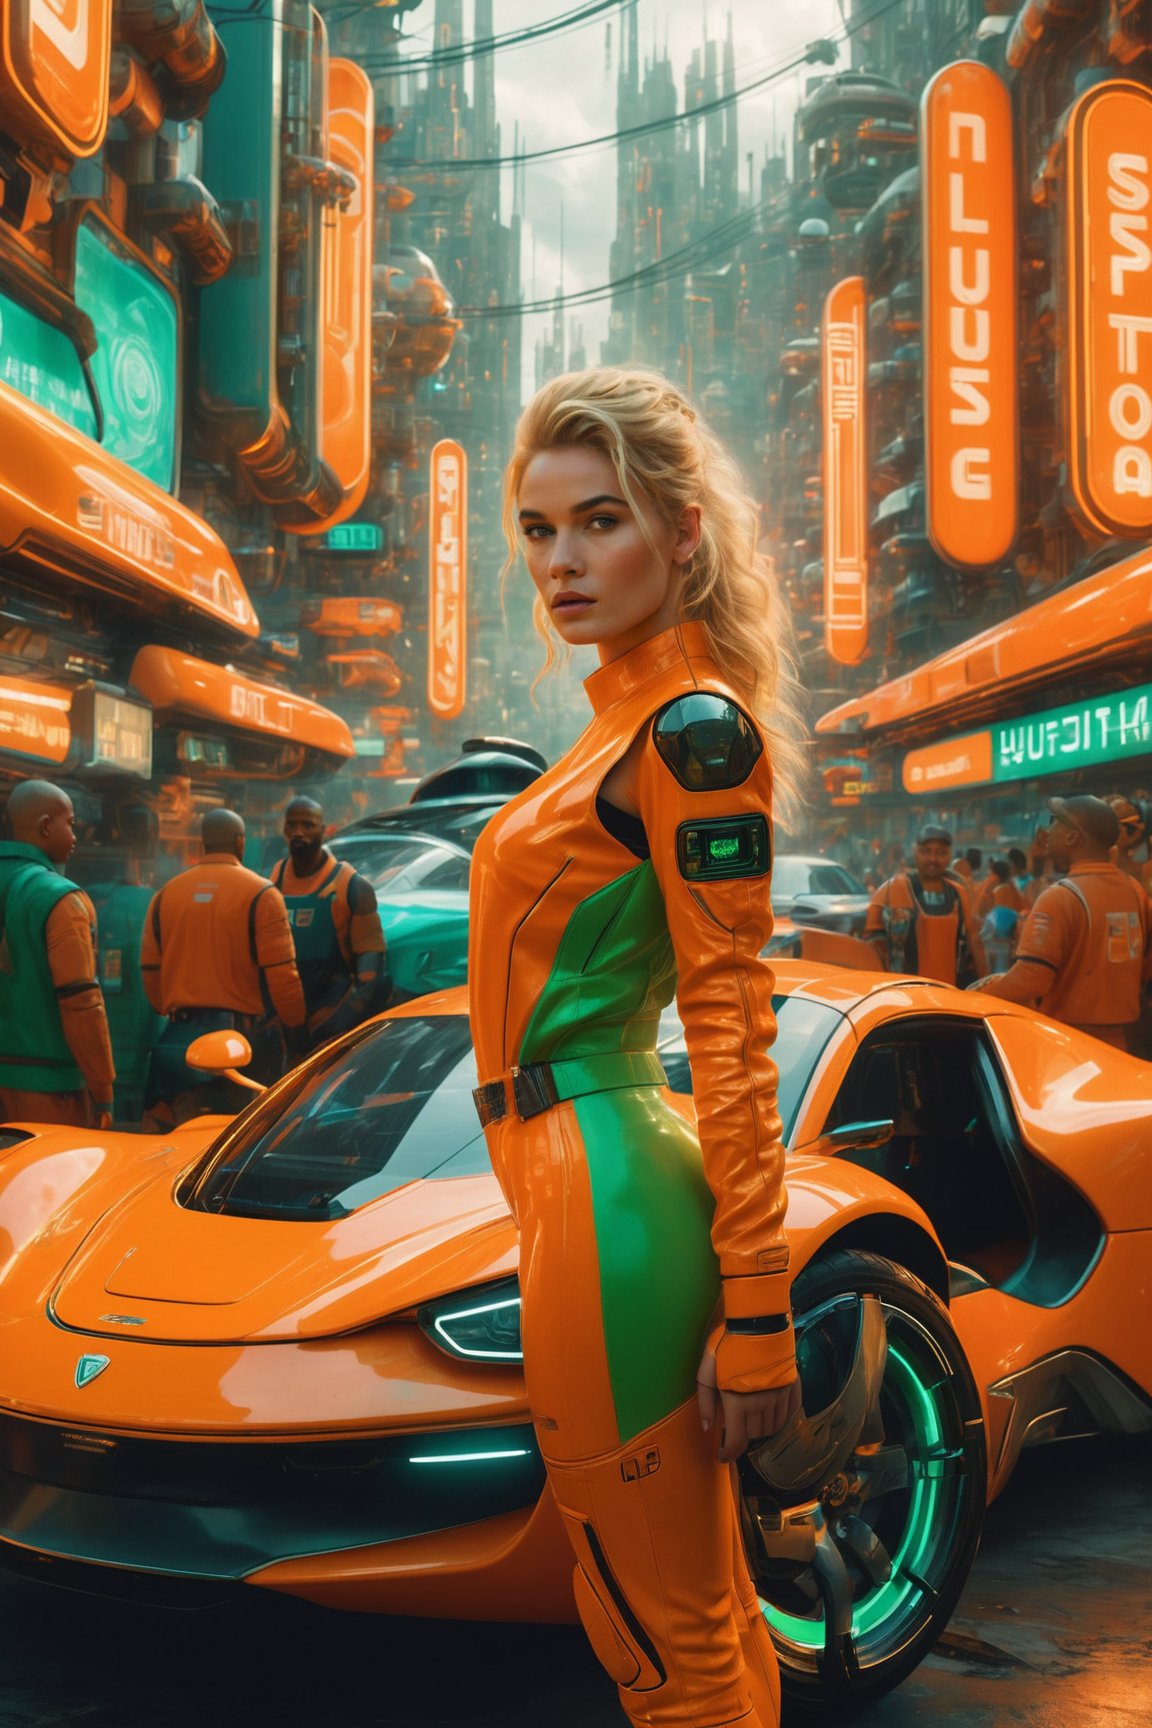 A young woman with blonde hair, standing next to a vibrant orange sports car. She is wearing a futuristic, orange outfit with white accents and a green emblem on her left arm. The backdrop is a bustling urban setting with neon signs, various vehicles, and a dense crowd of people. The atmosphere seems to be that of a cyberpunk city, with a mix of traditional and futuristic elements.